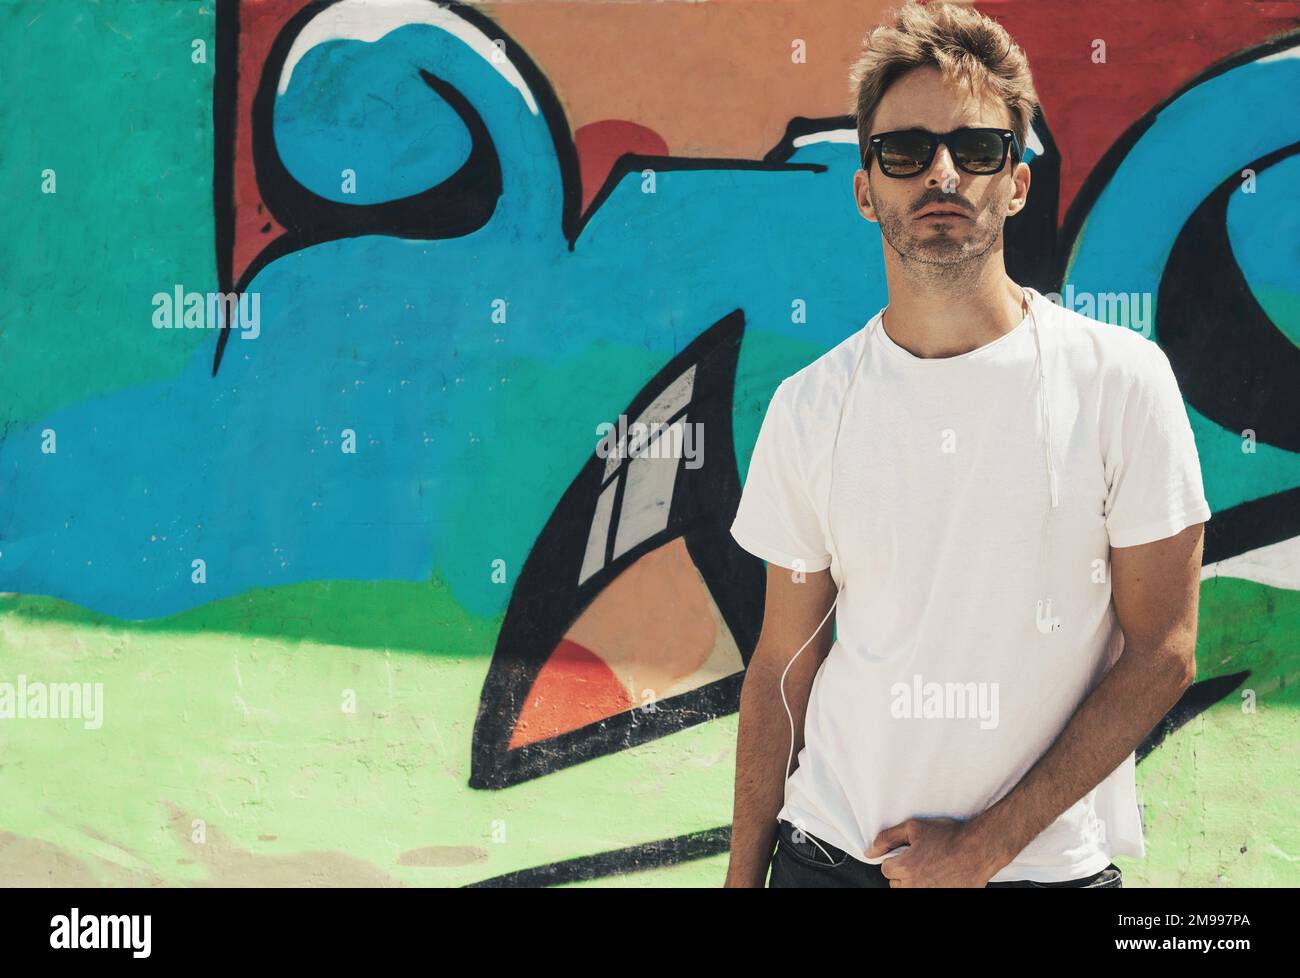 Young bearded handsome man standing next to a colorful wall background wearing an empty white t-shirt and sunglasses. Horizontal mock up style. Stock Photo